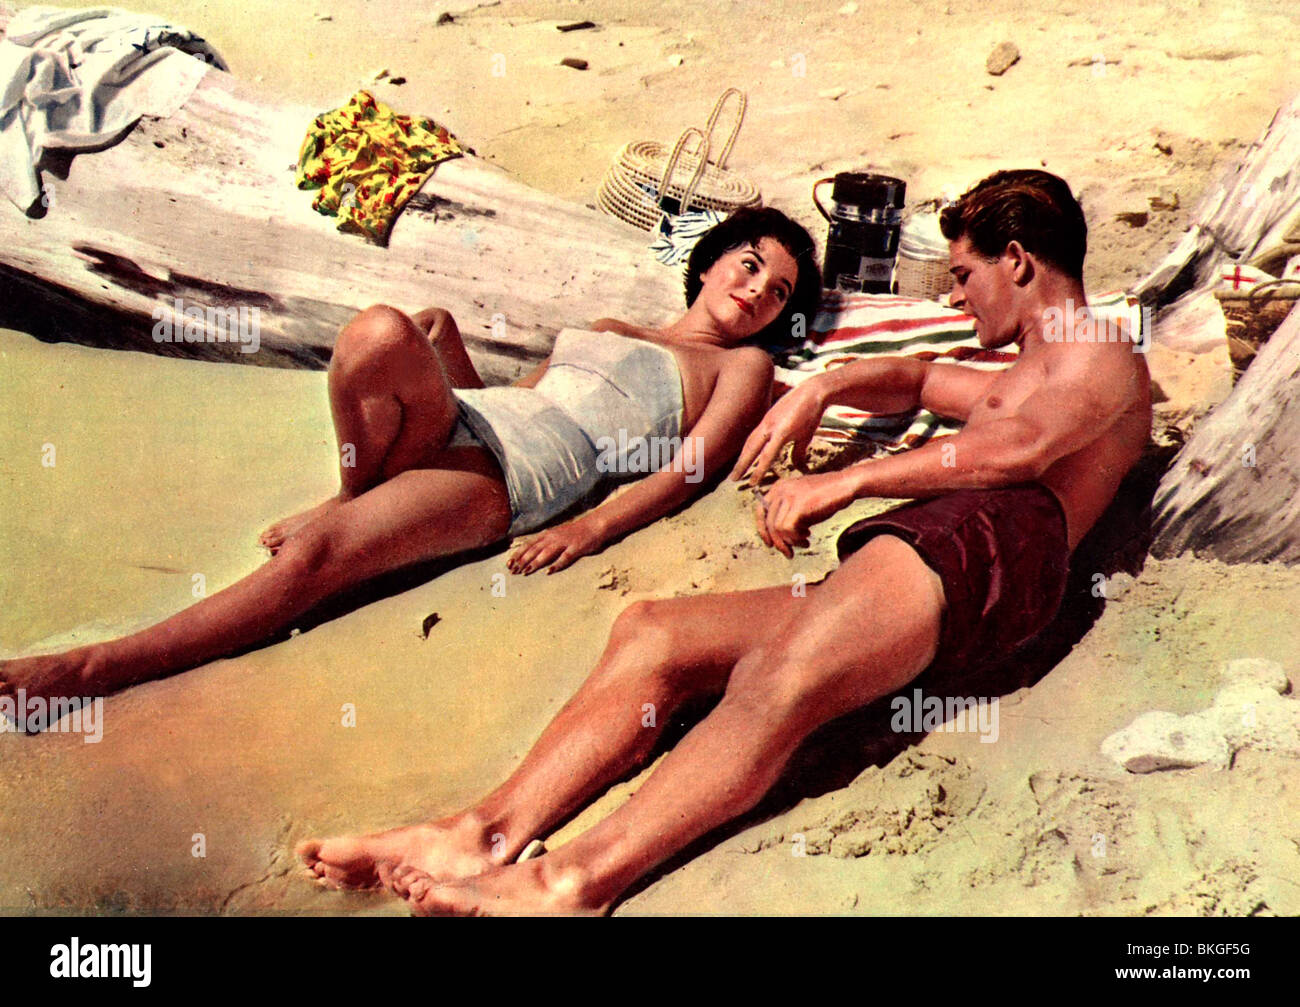 Isola del Sole (1957) JOAN COLLINS, STEPHEN BOYD ISIS 002 FOH Foto Stock